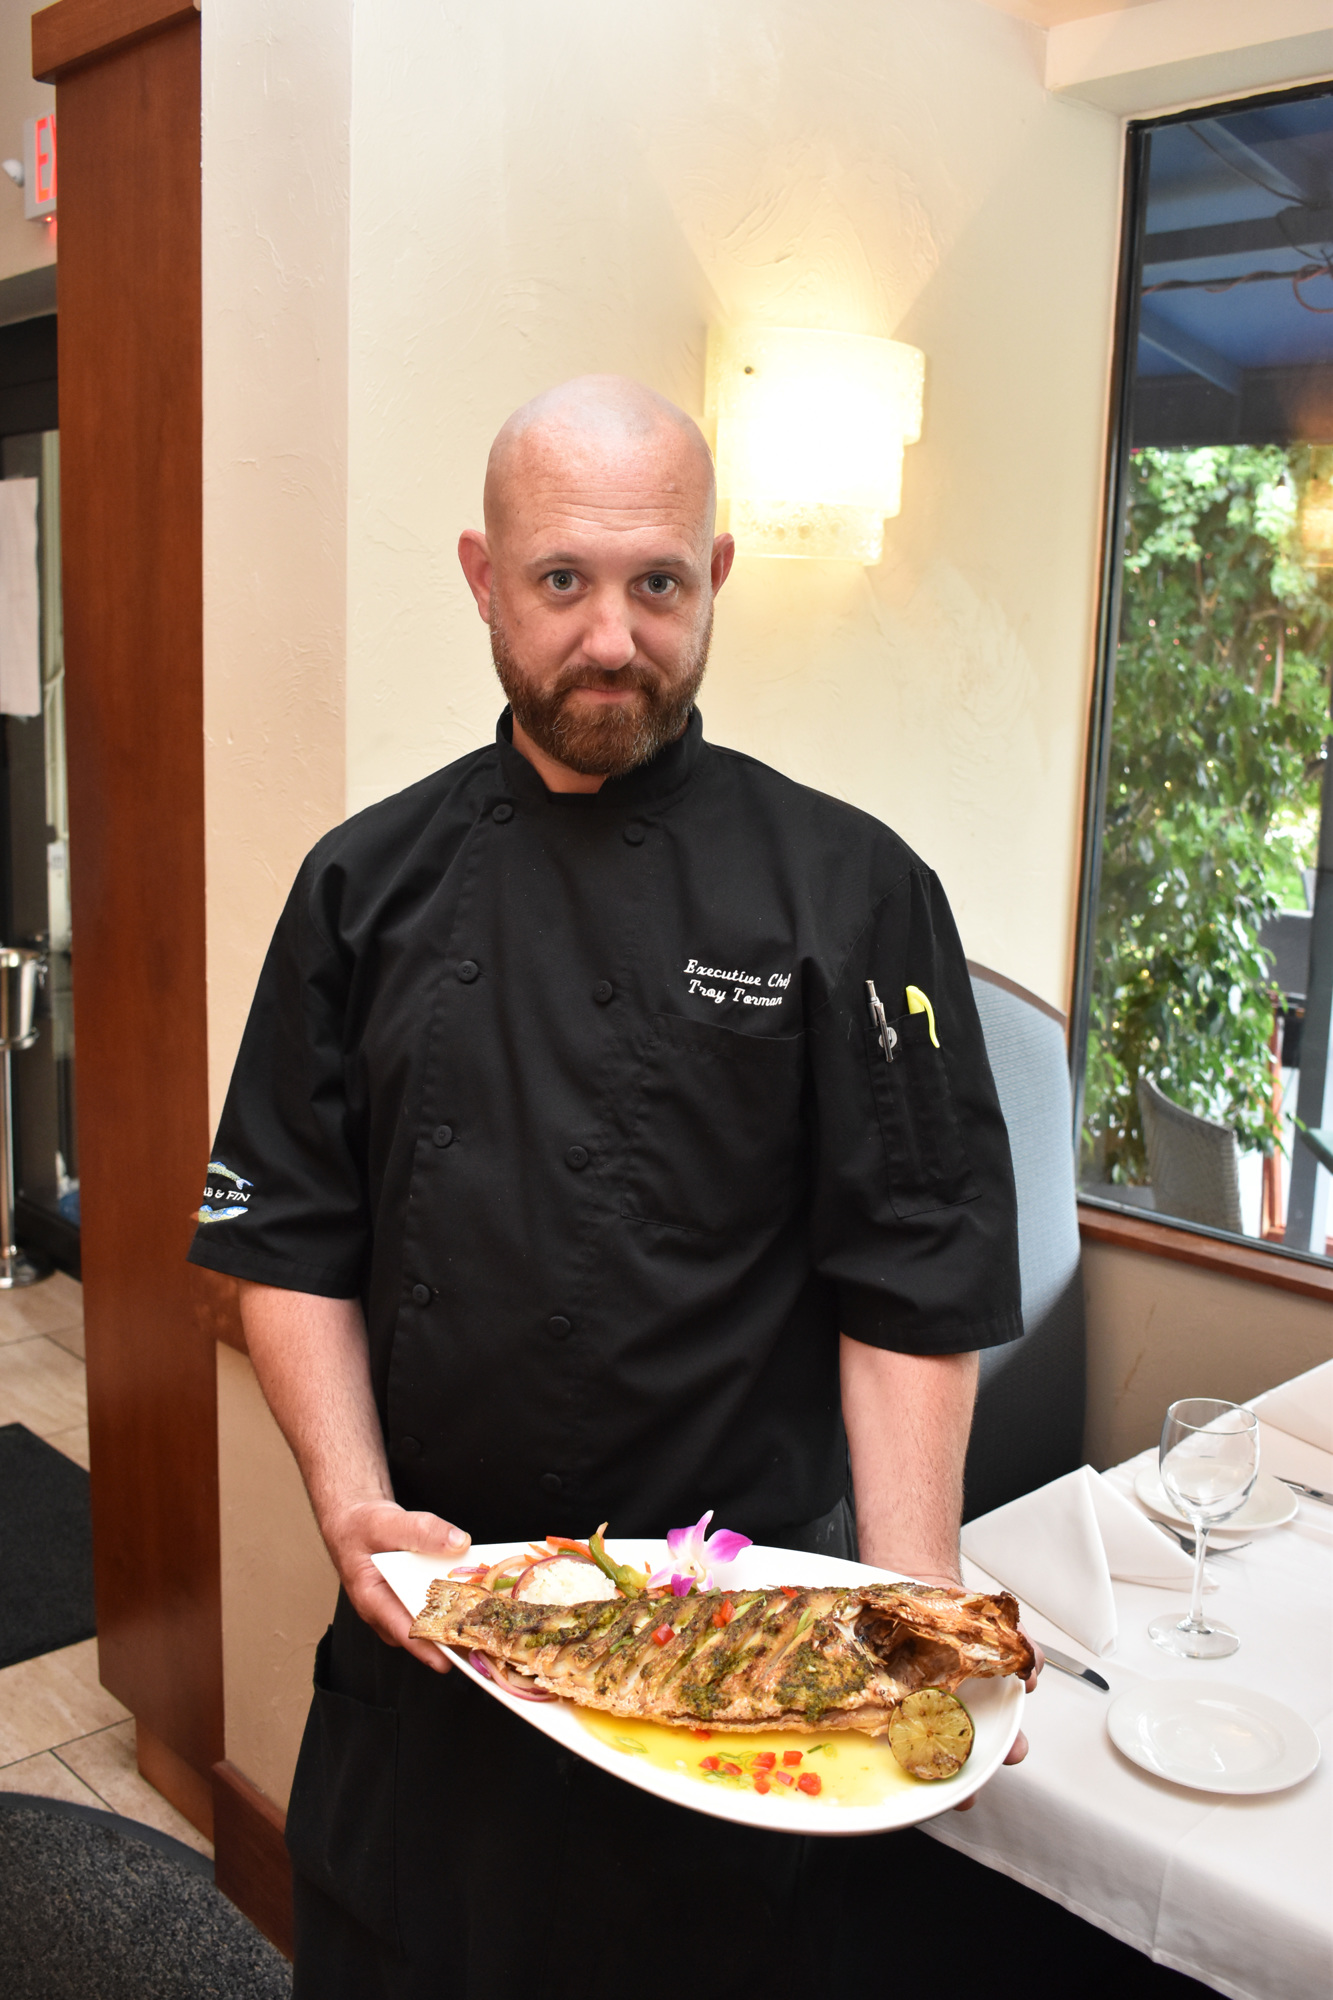 Chef Troy Torman of Crab & Fin offers six oyster varietals and seven to nine fish options daily. Photo by Niki Kottmann